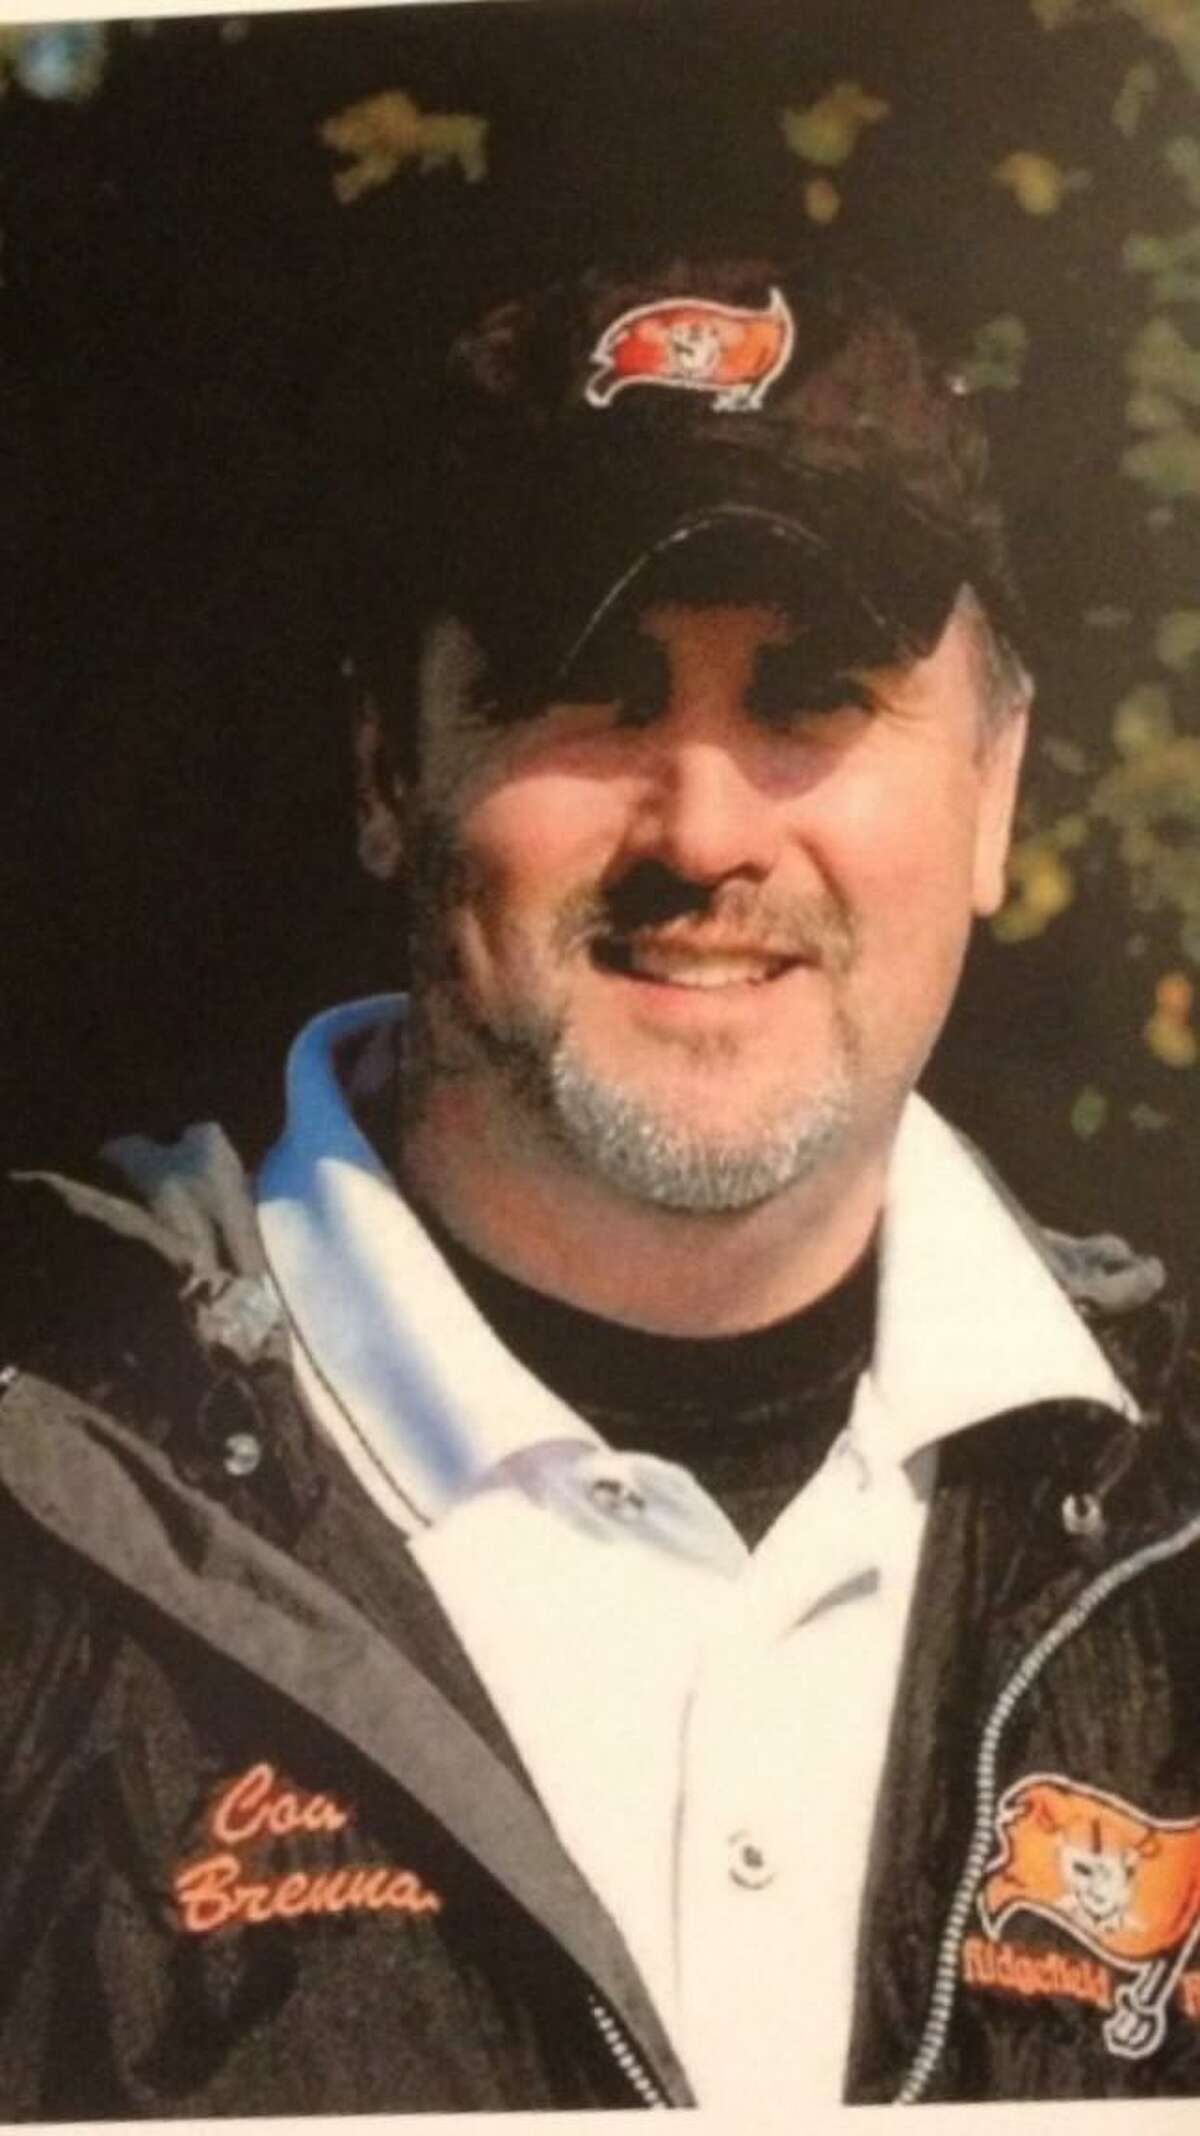 Edward Brennan, 50, beloved father, husband and coach who died of of a cardiac event at a Ridgefield health club in Dec. 2012.